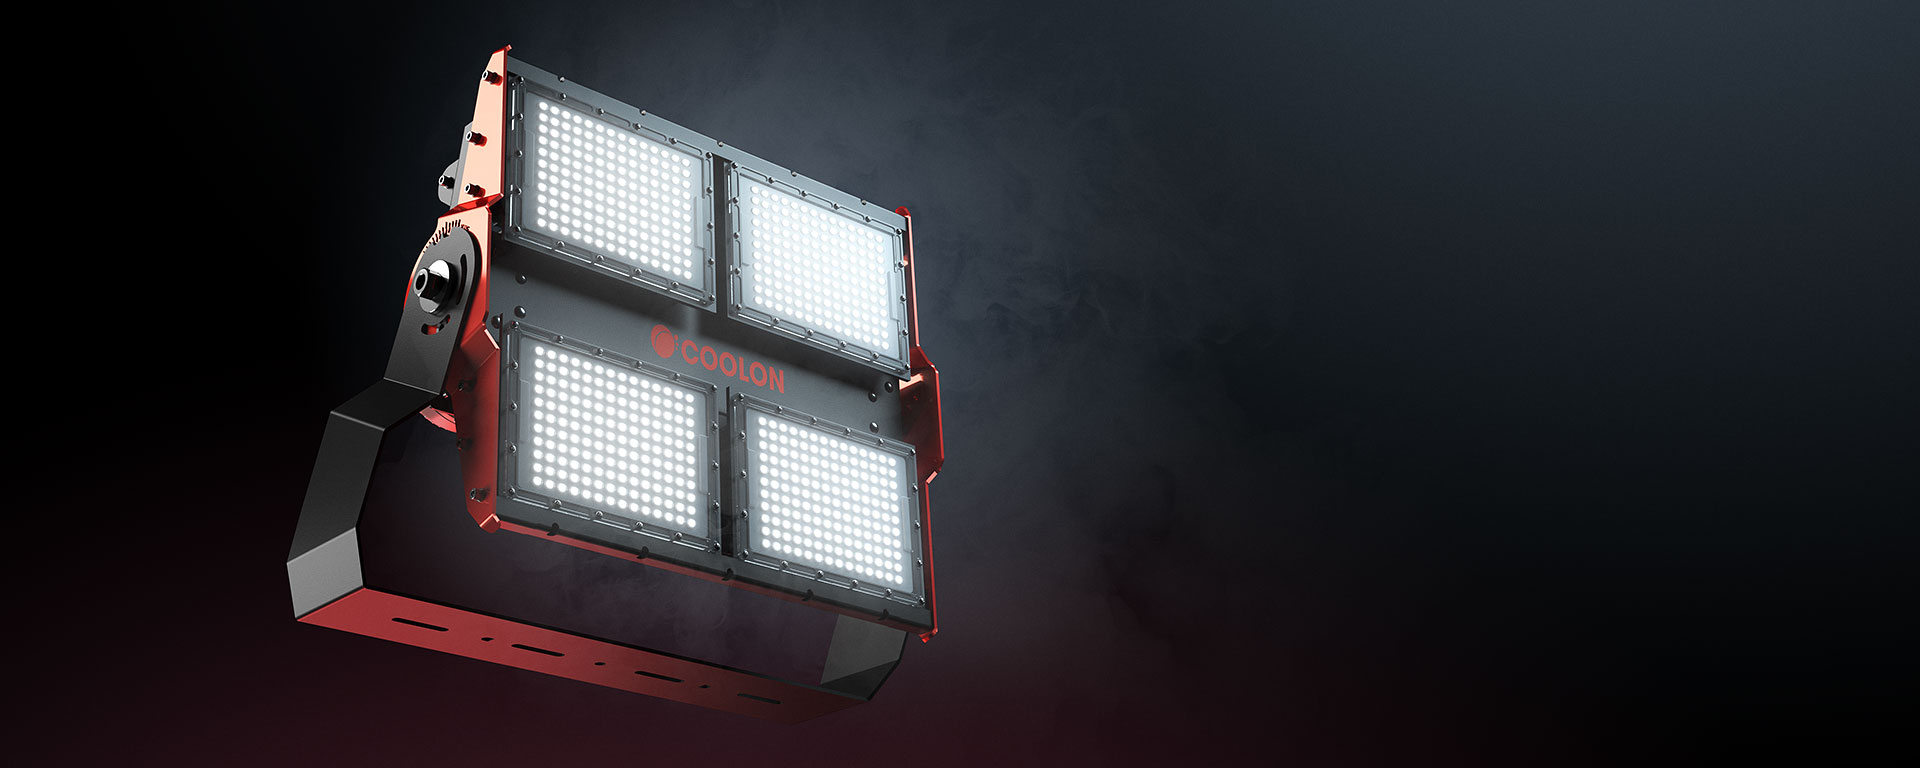 The sleek and more compact 480W XBLADE™ Heavy-Duty LED Light optimises the latest from Coolon’s LED lighting technology to deliver the most powerful and robust flood light for heavy industrial applications.